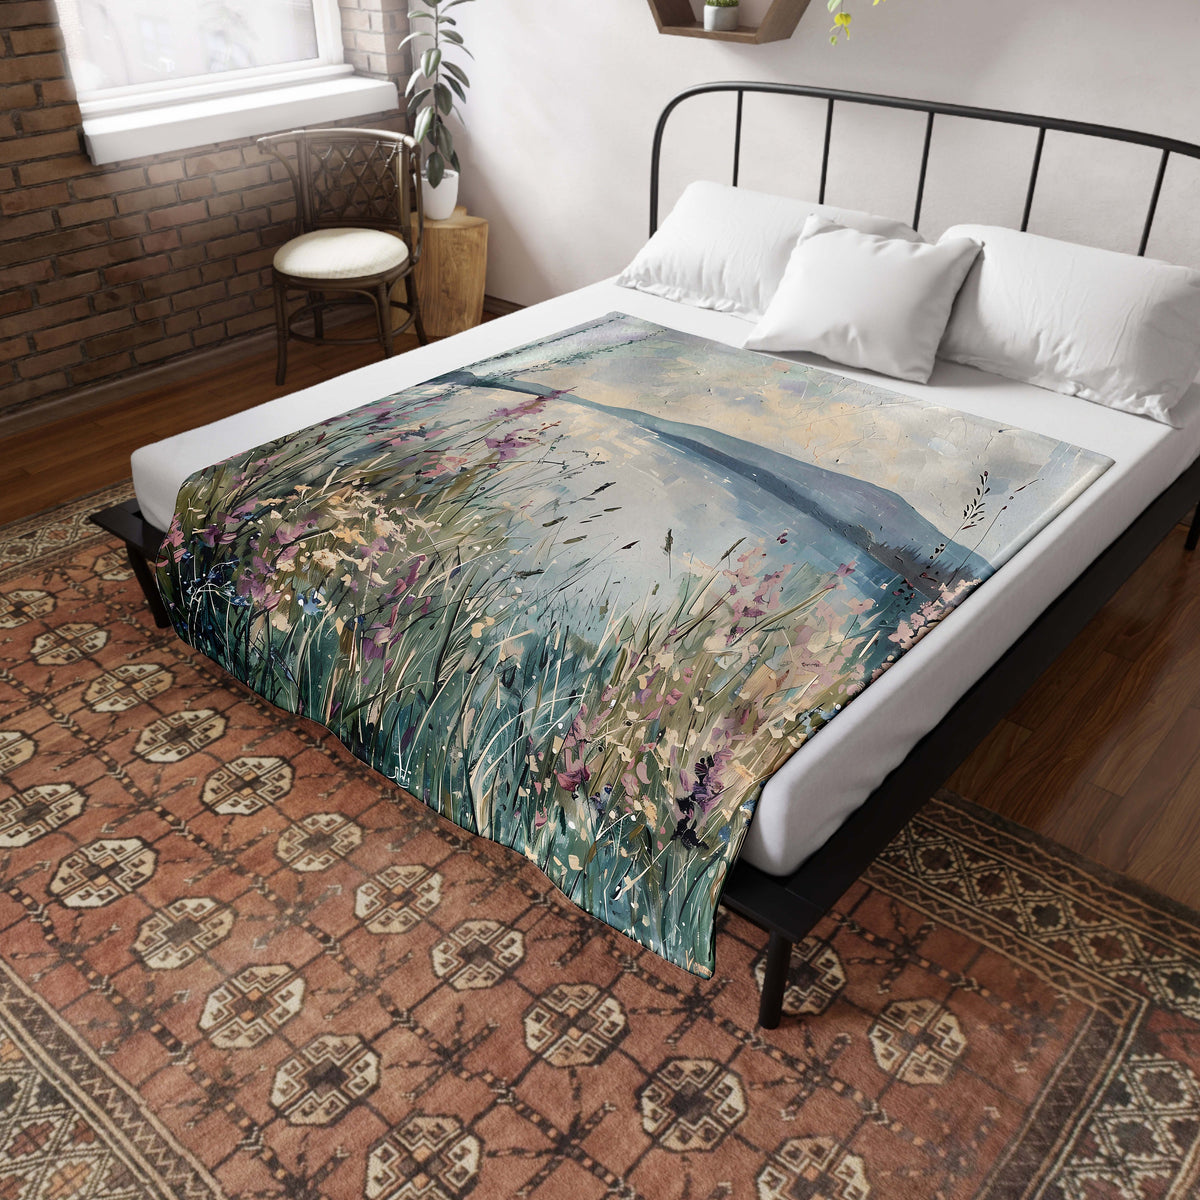 a bed with a painting on it in a room